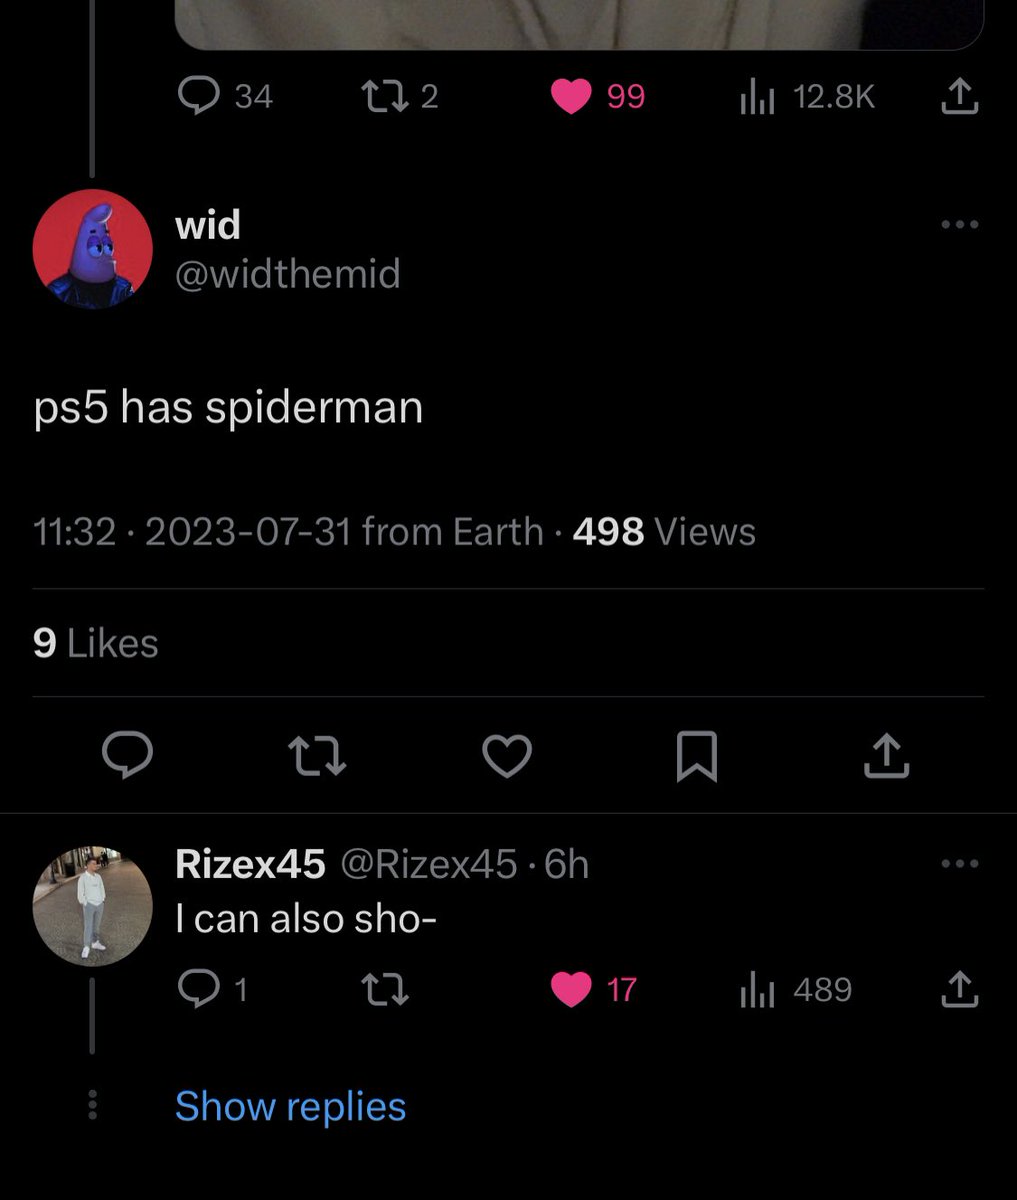 This is legitimately one of the most hilarious replies I’ve seen on this app 😂

@Rizex45 has no chill LMAOO 💀